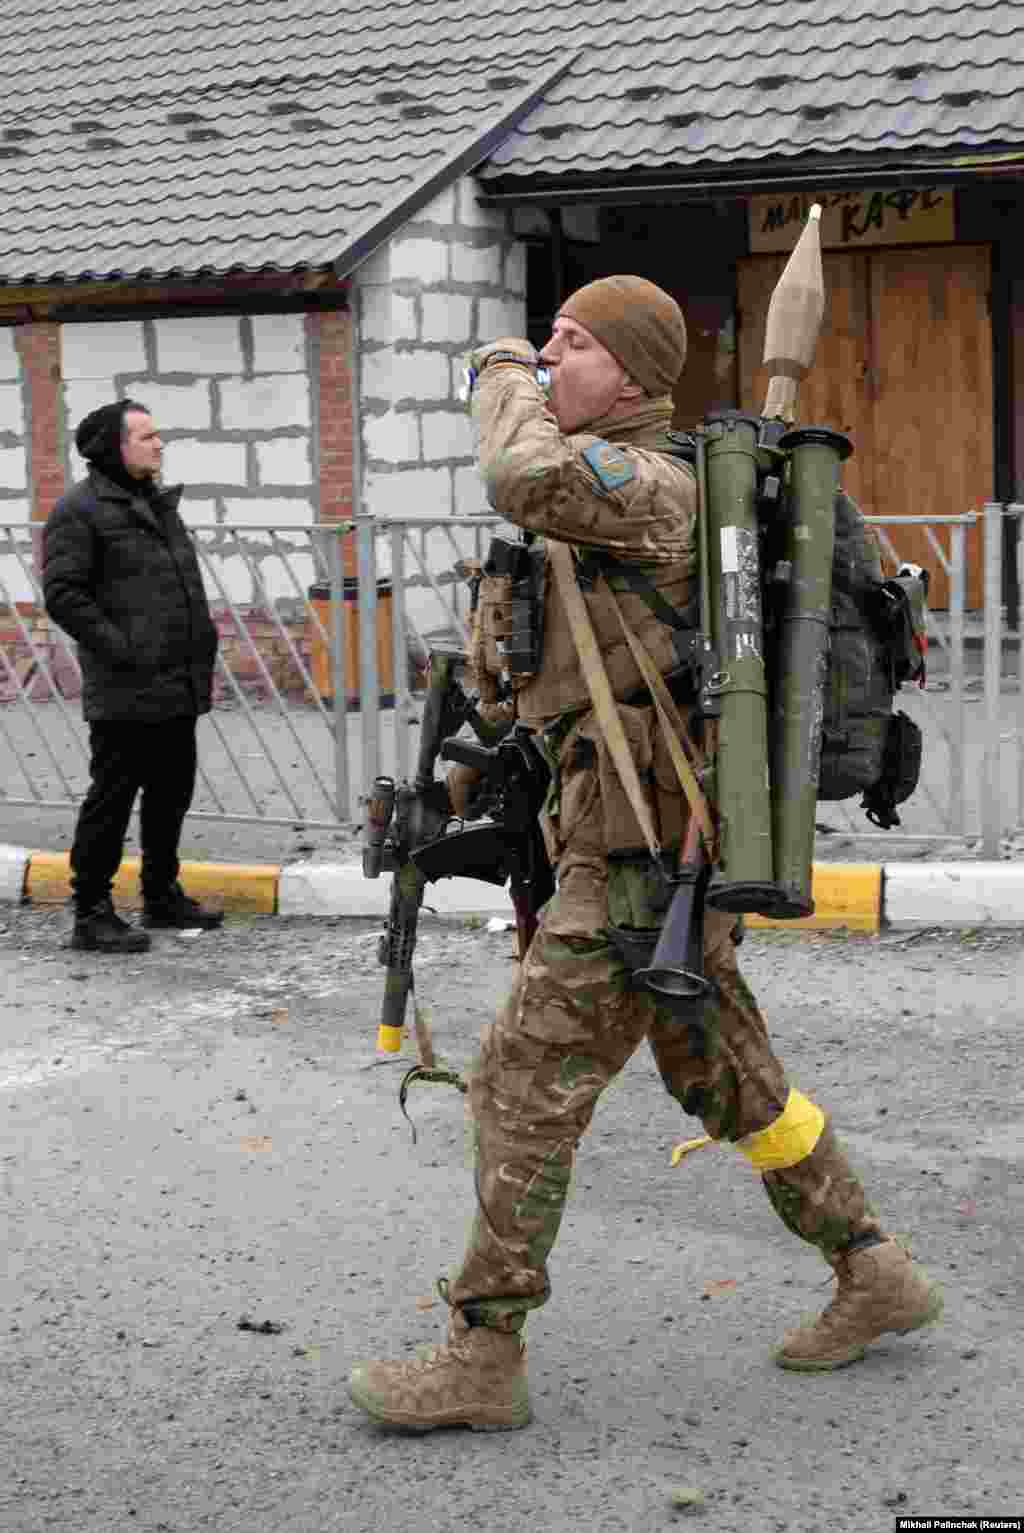 A heavily armed Ukrainian soldier on March 5 in Irpin, a northwestern suburb of Kyiv. Irpin was pounded by Russian air strikes and has been cut off from electricity, water, and heating for three days.